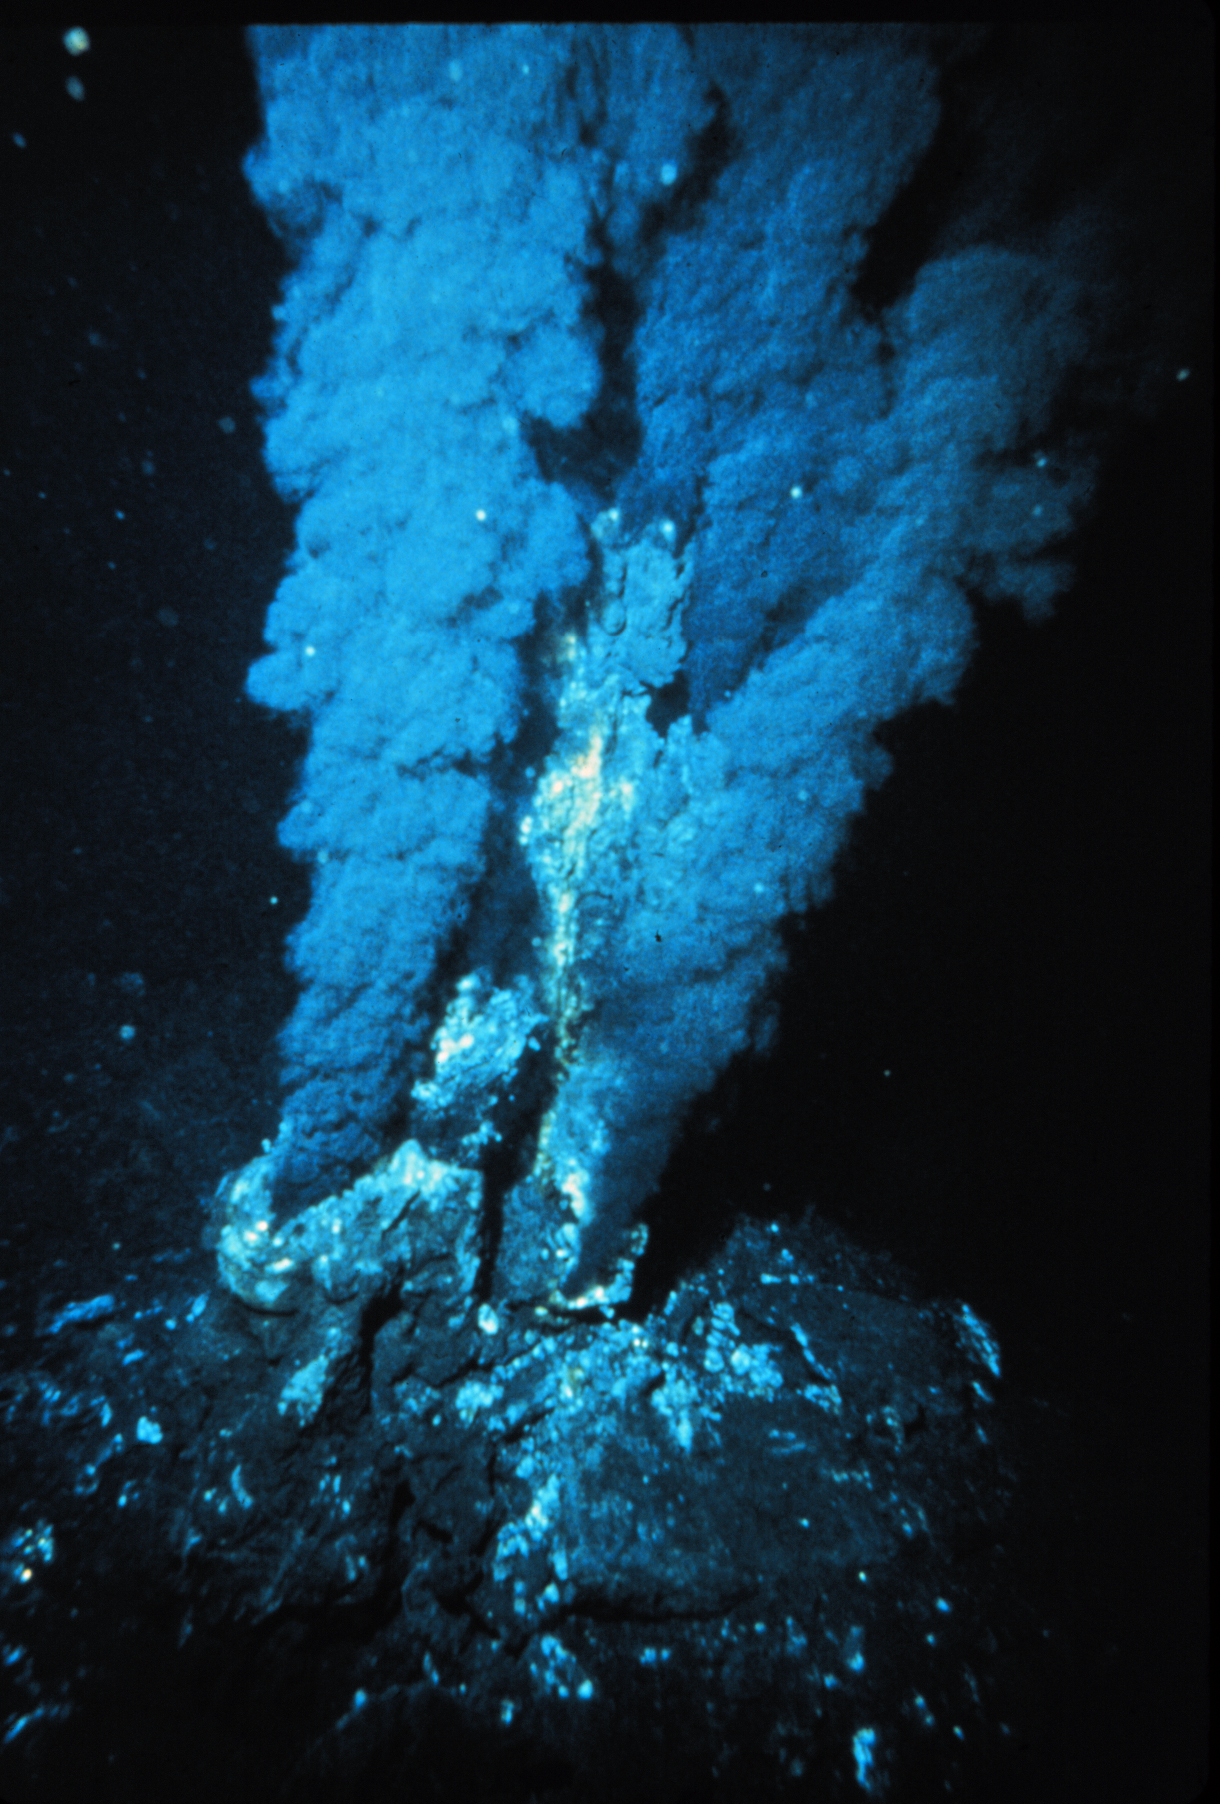 Inactive hydrothermal vents in the spotlight